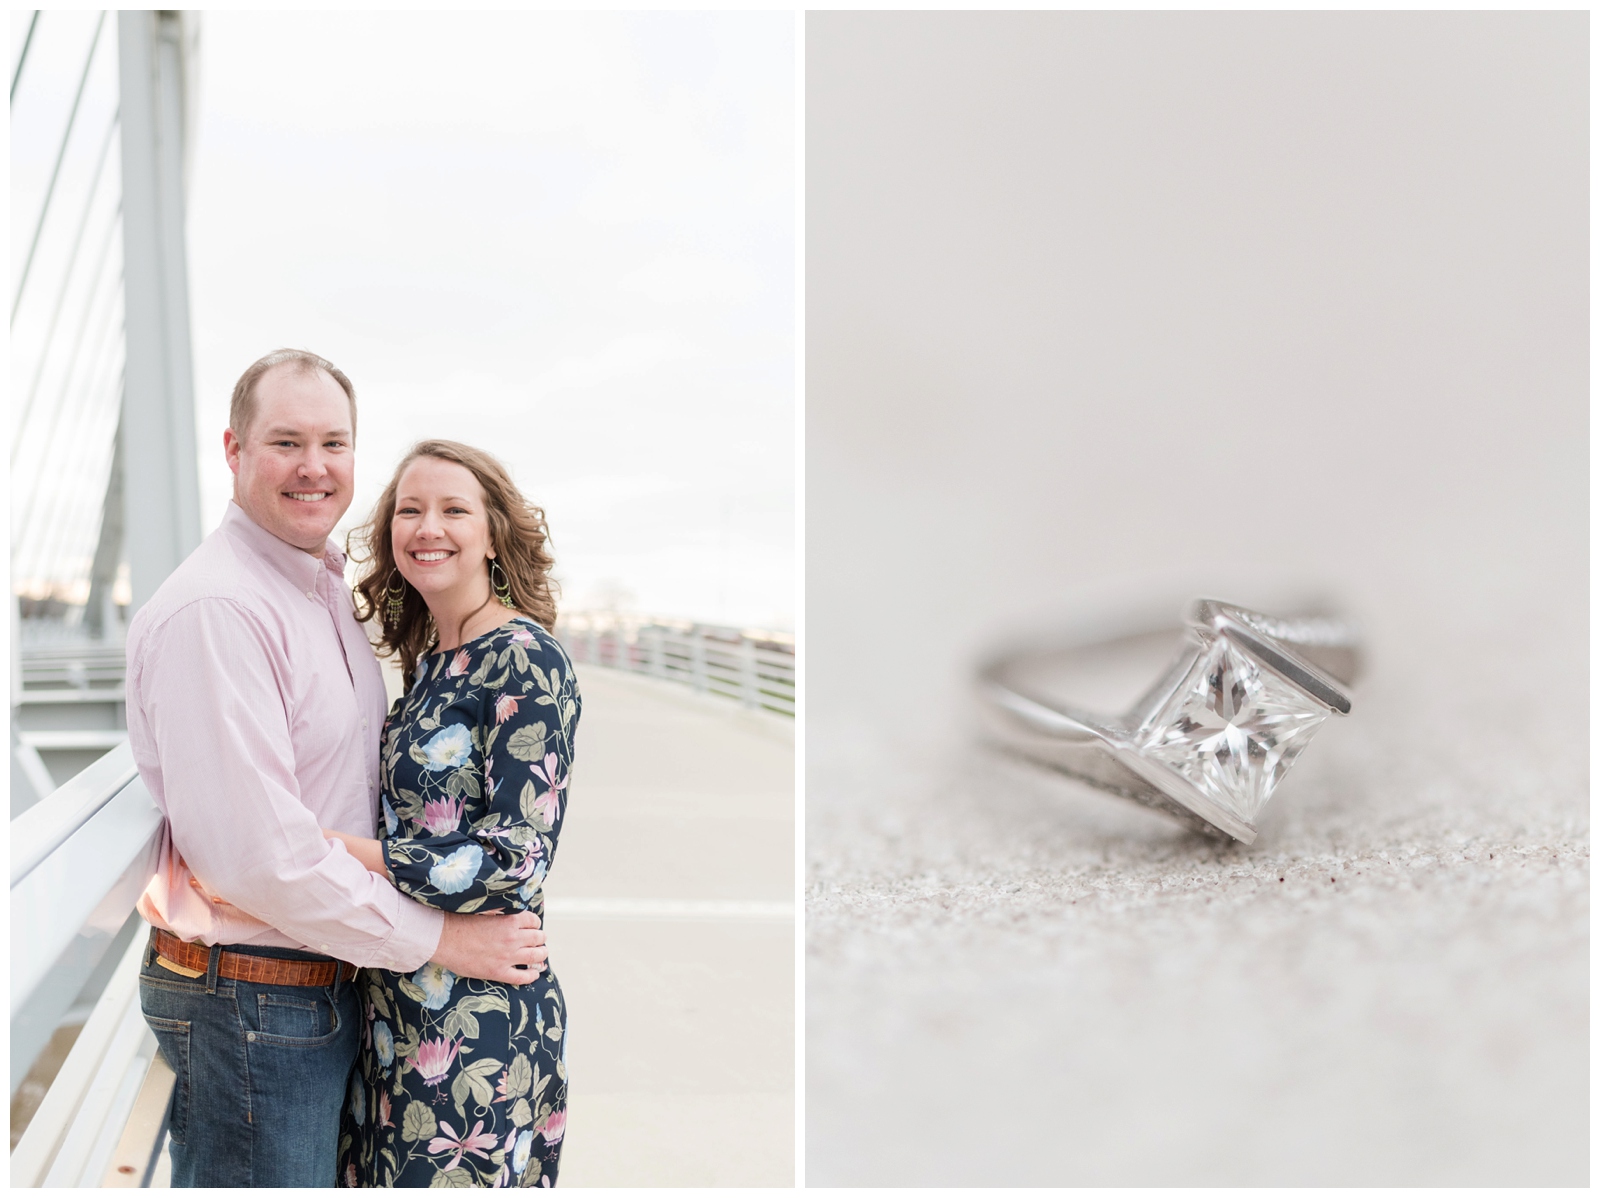 Two photos from engagement session, the left has a couple looking at the camera smiling. The left photo has a single image of an engagement ring 